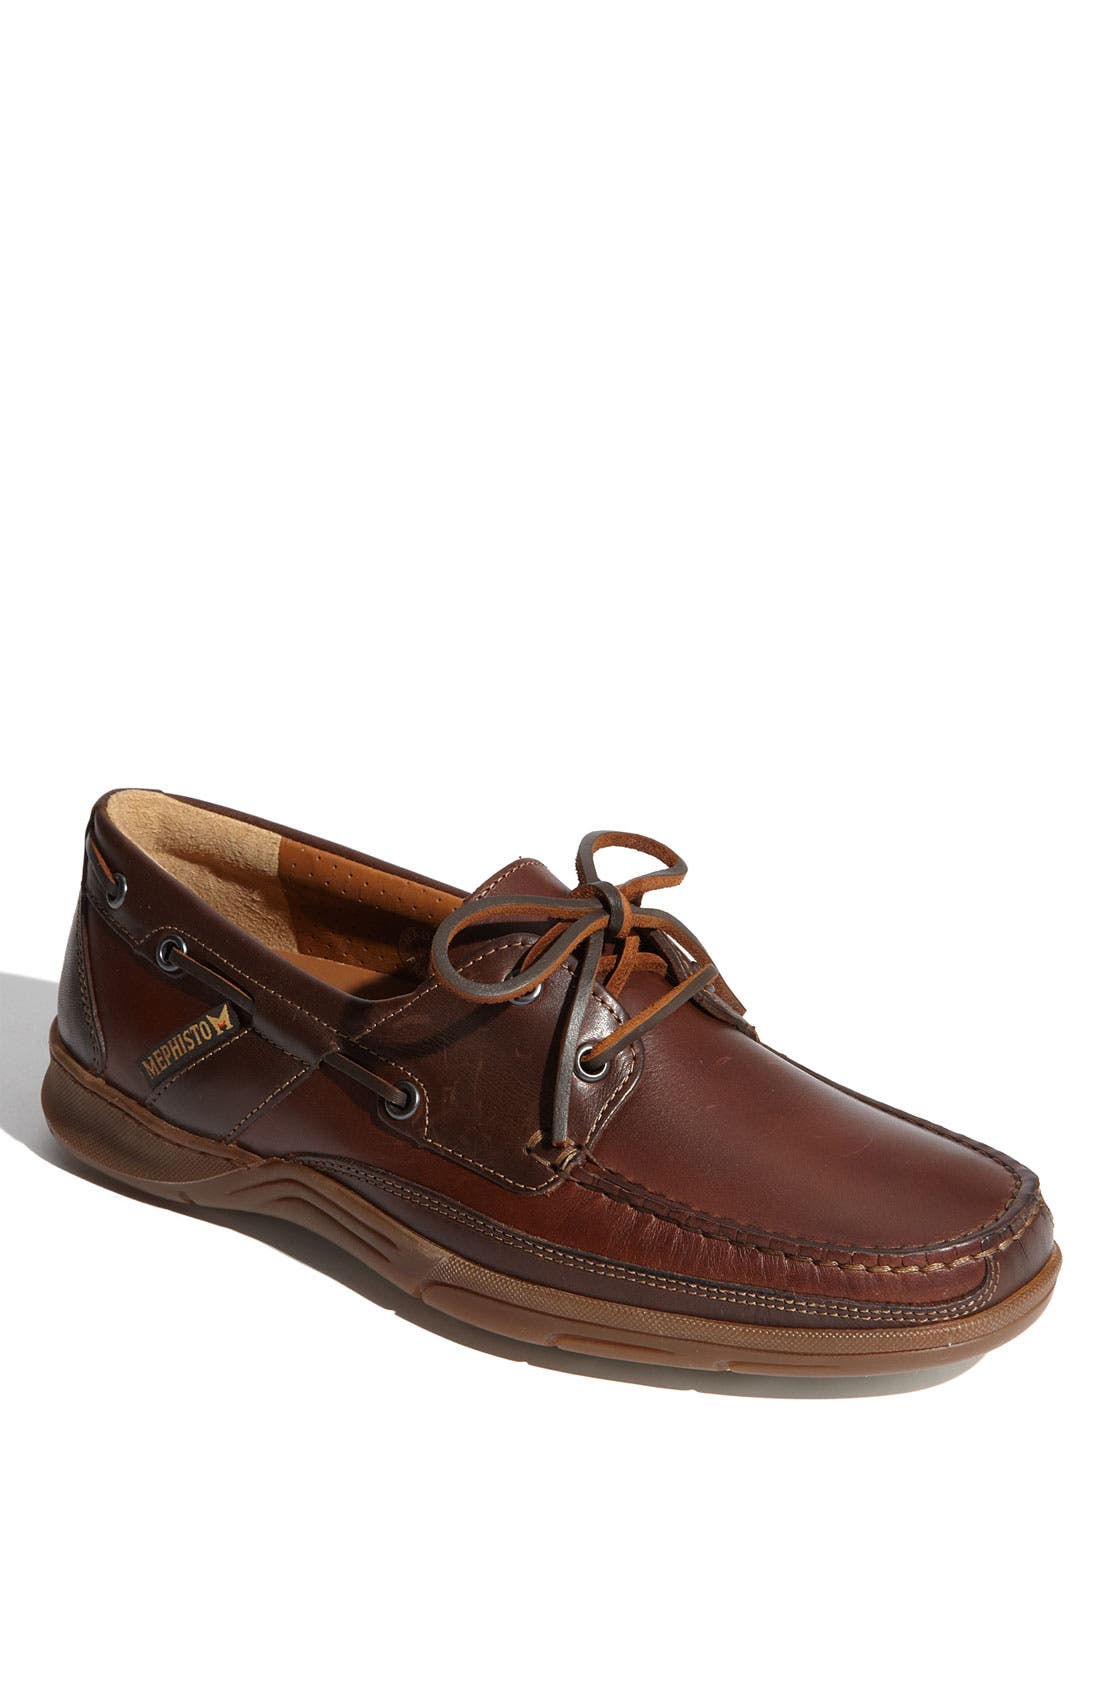 mephisto boat shoes sale